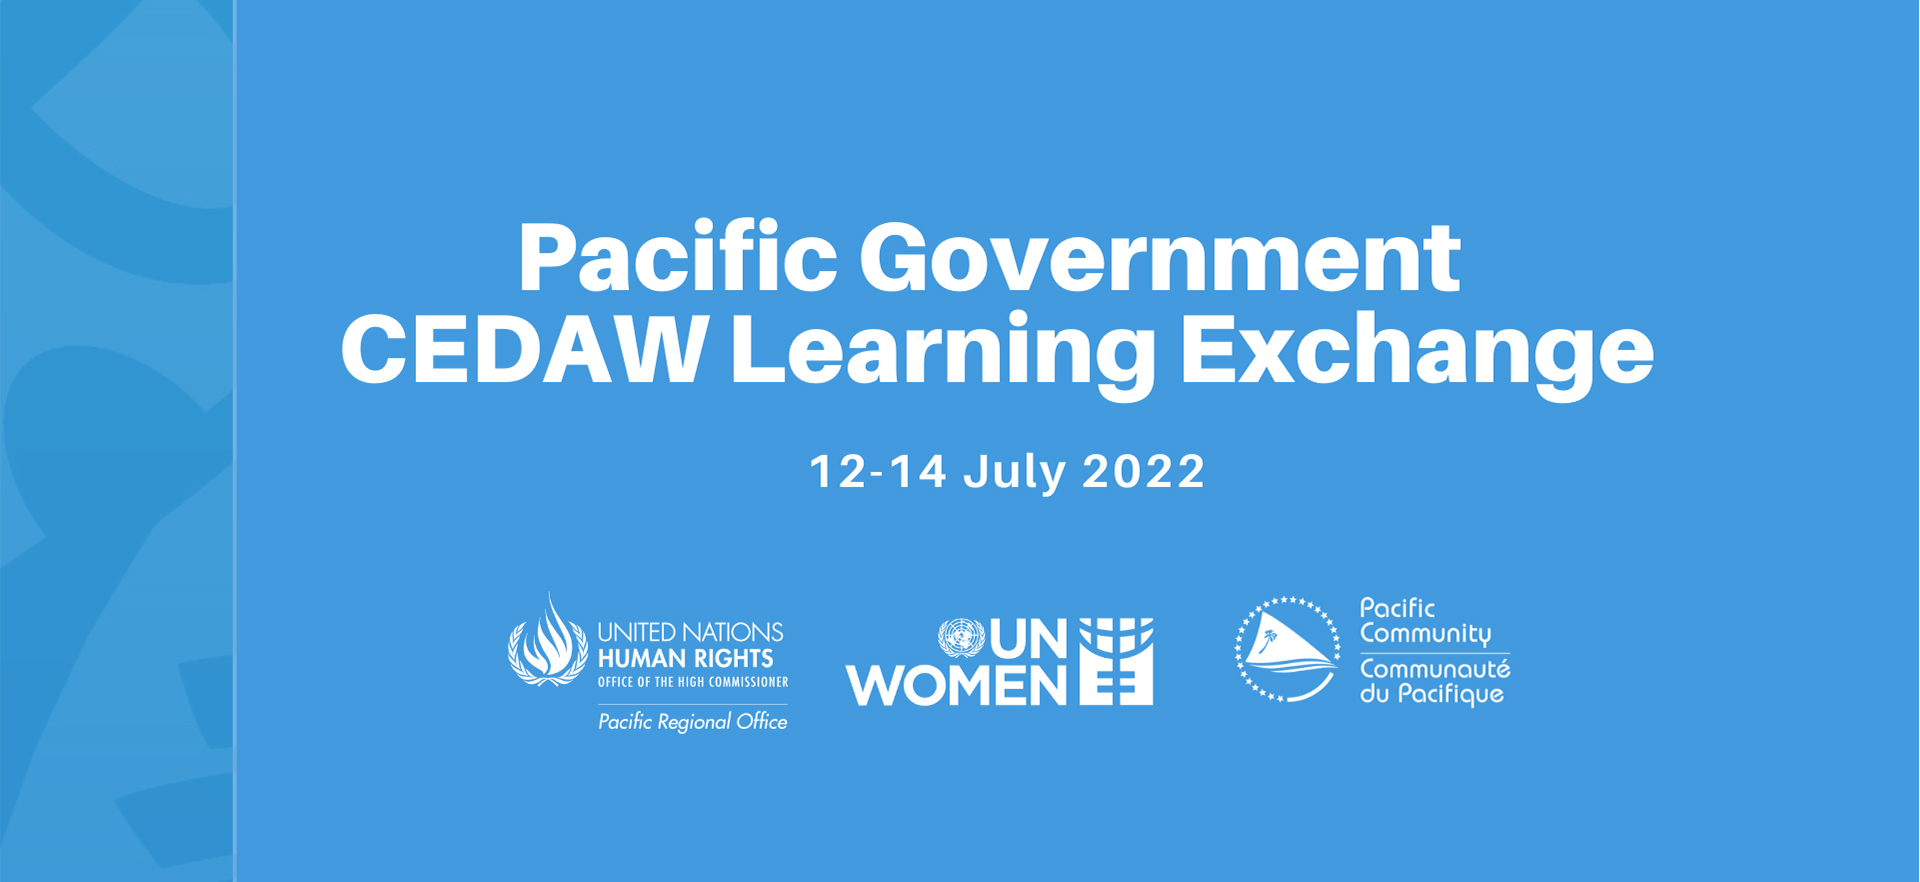 2022-07/CEDAW Learning Exchange event image.jpg